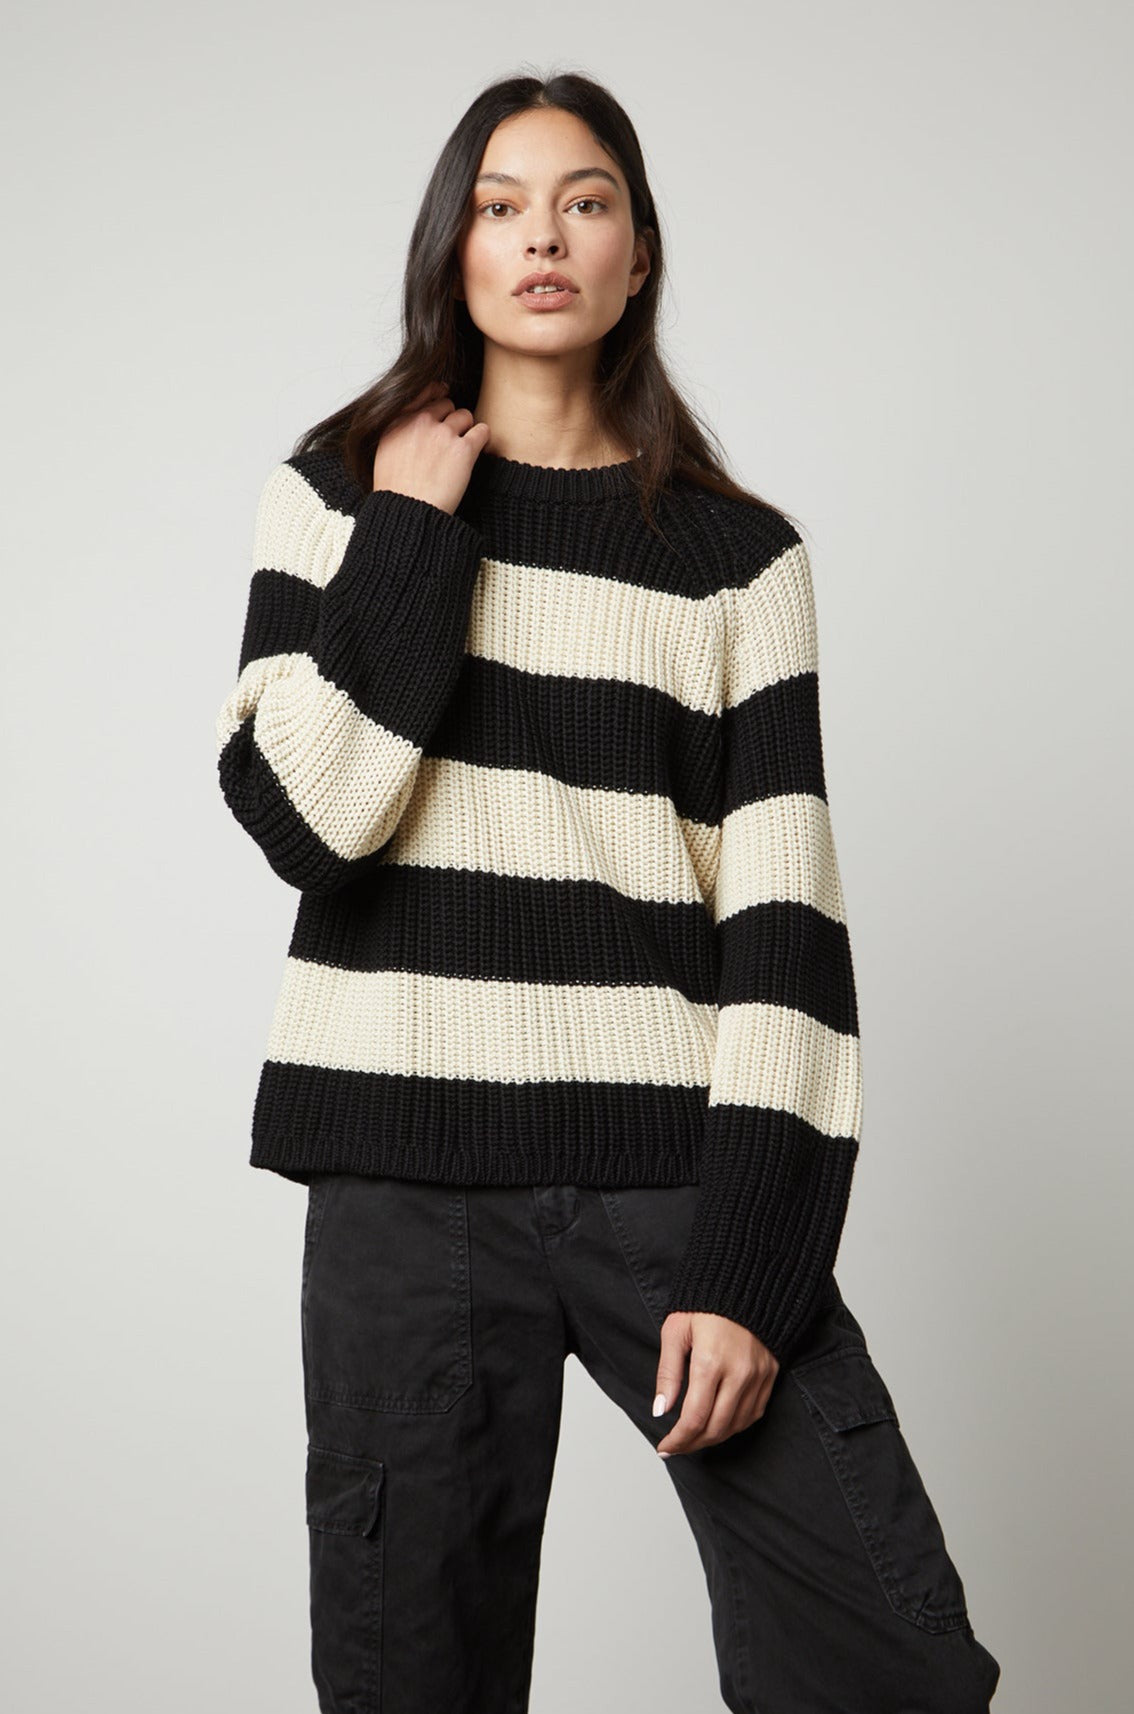 A model wearing the Velvet by Graham & Spencer CIARA STRIPED CREW NECK SWEATER exudes comfort and warmth.-35507445039297